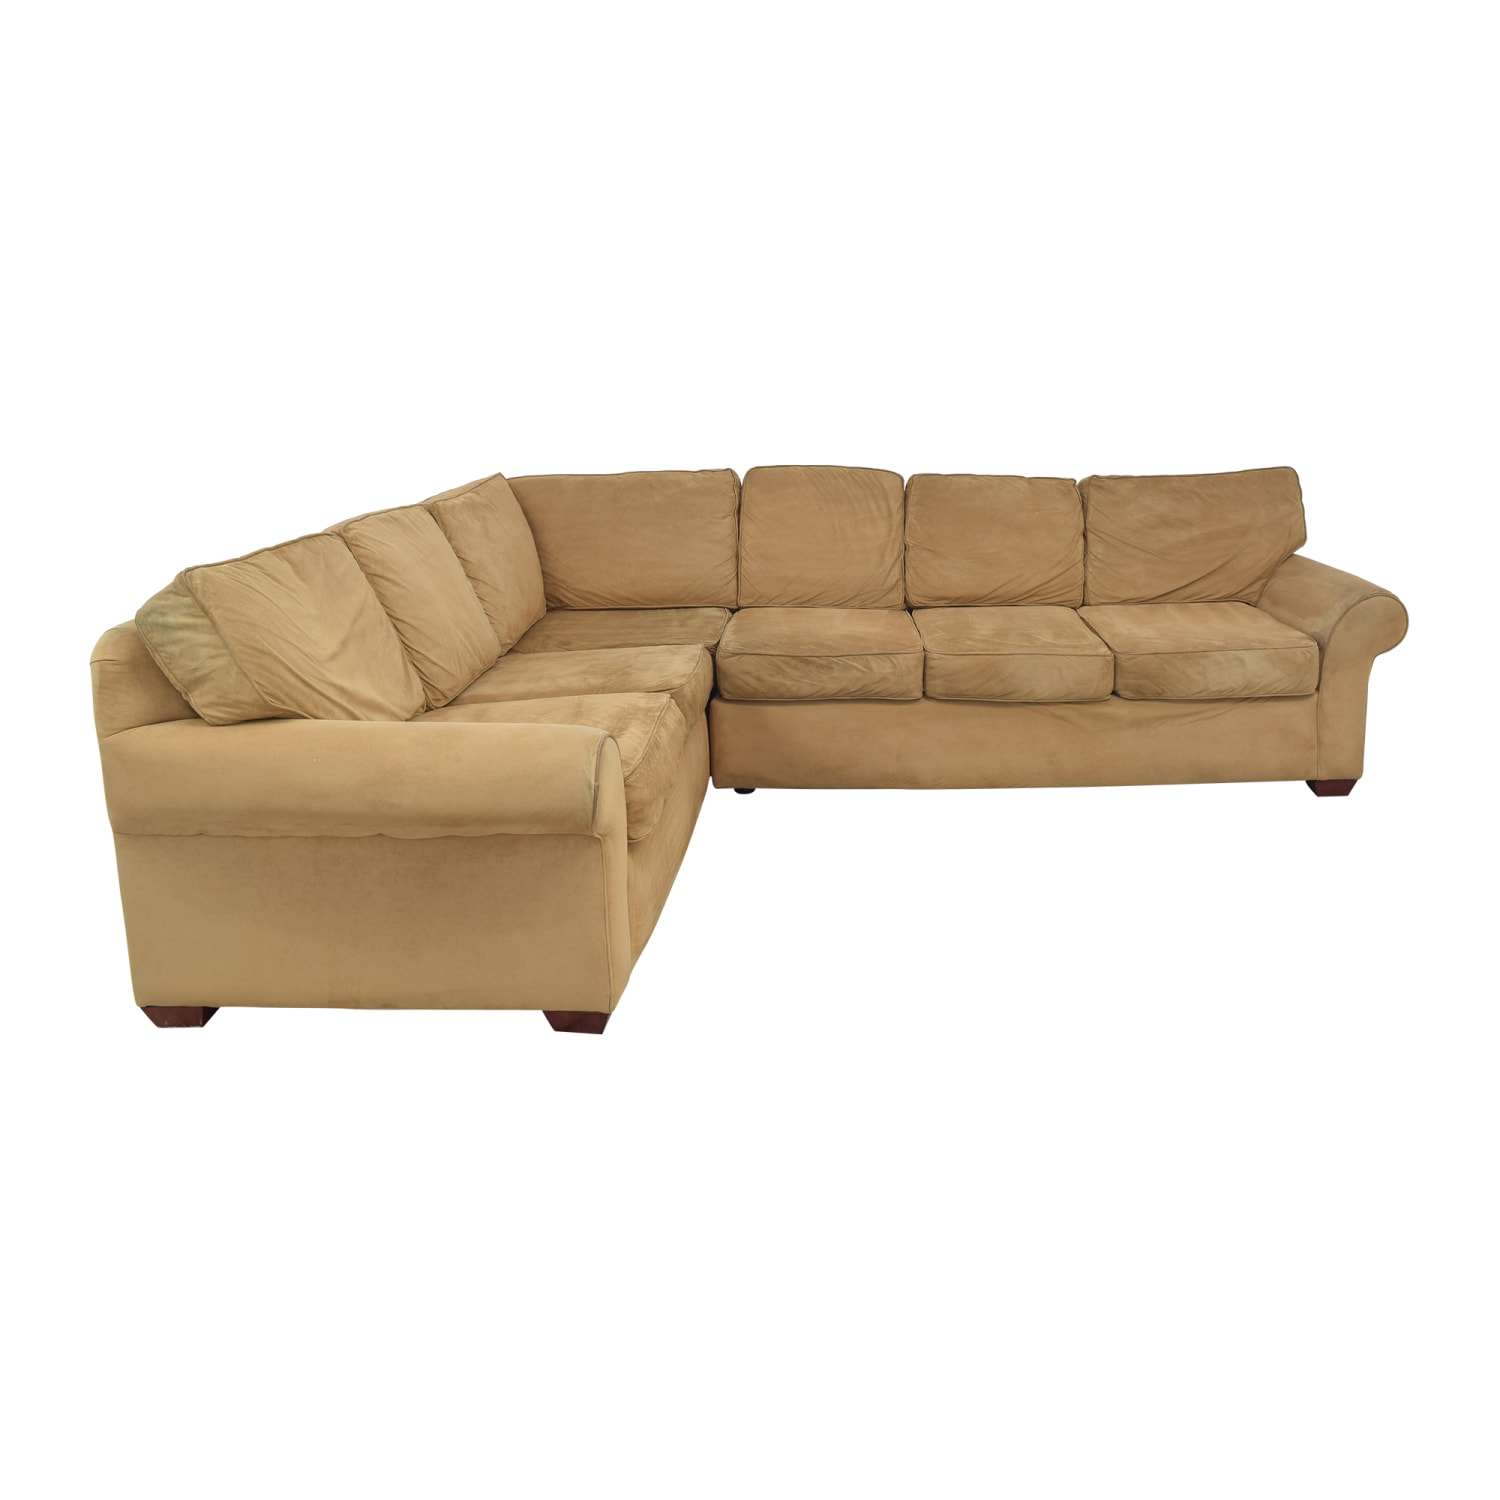 Klaussner Roll Arm Corner Sectional